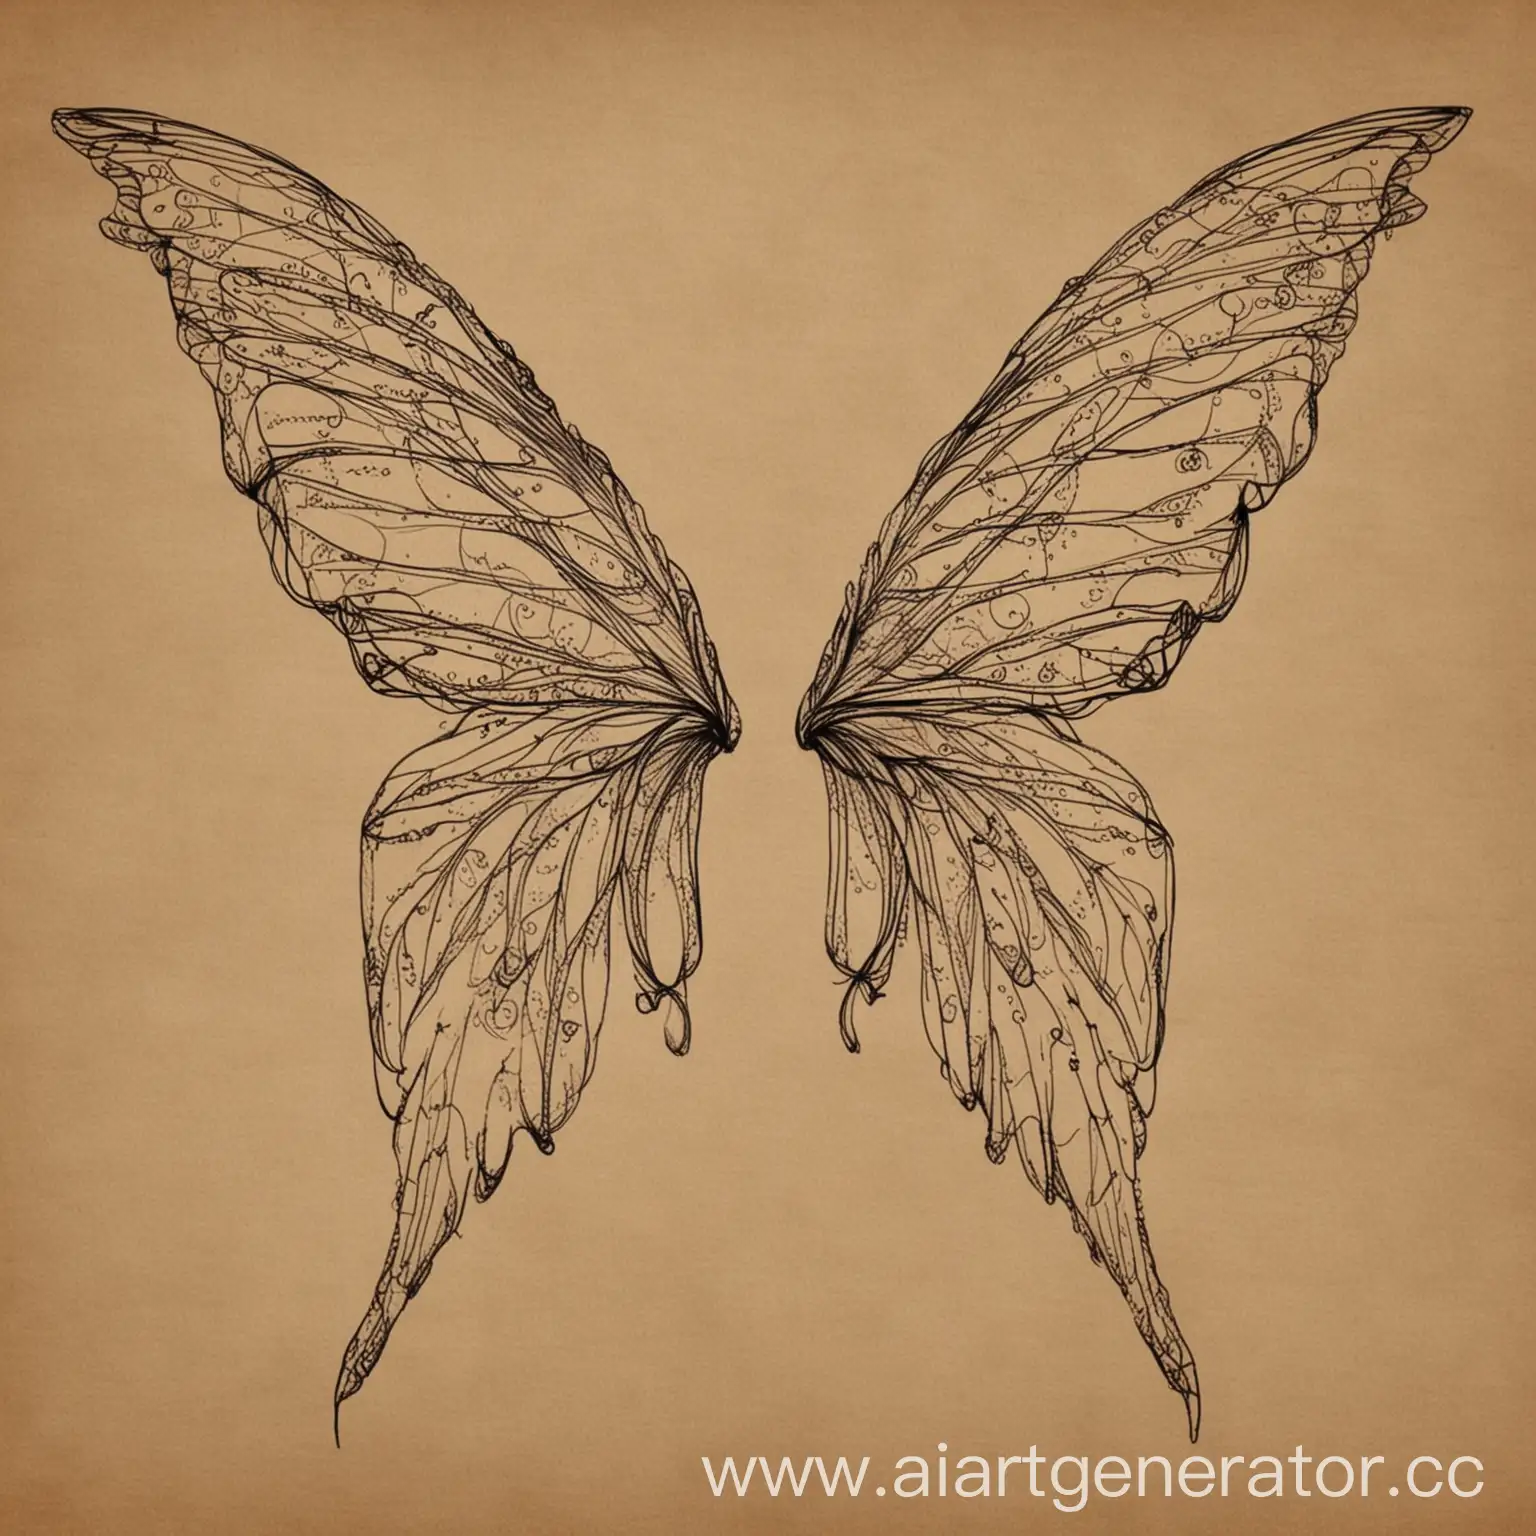 Pair-of-Drawn-Fairy-Wings-in-Photorealistic-Style